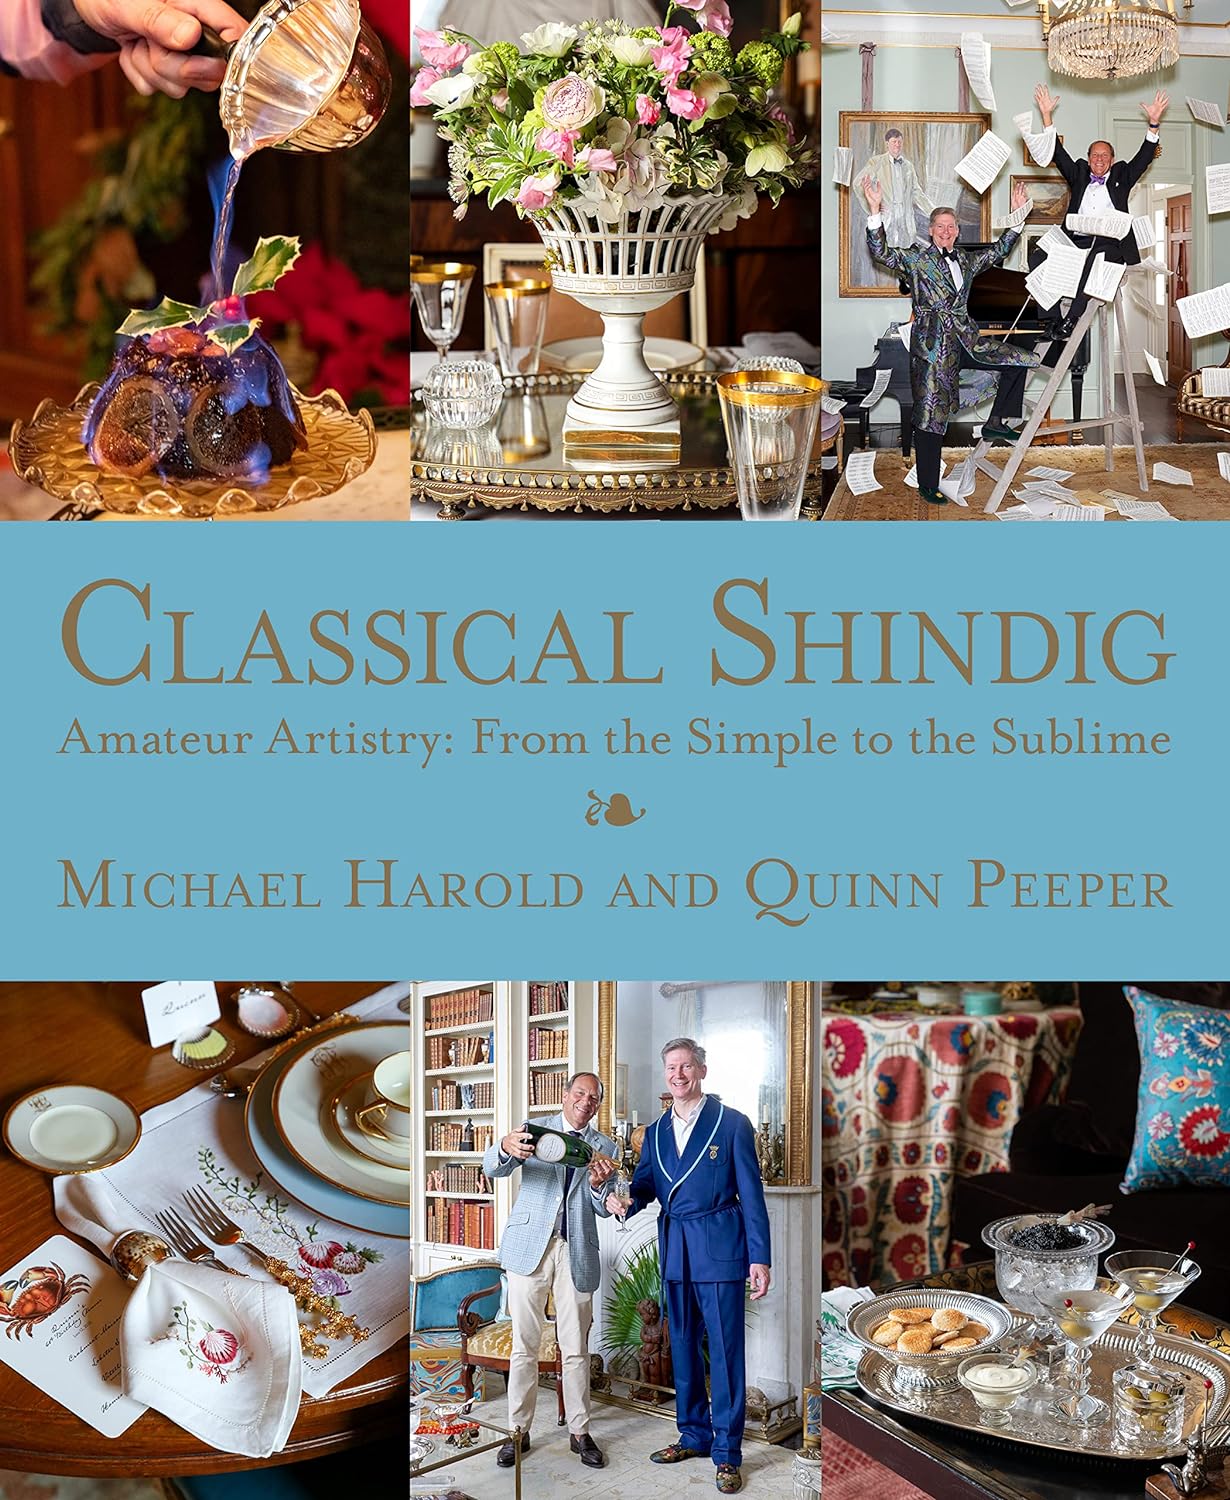 Book cover of Classical Shindig (Susuan Schadt Press, 2023) by Michael Harold and Quinn Peeper. #classicalshindig